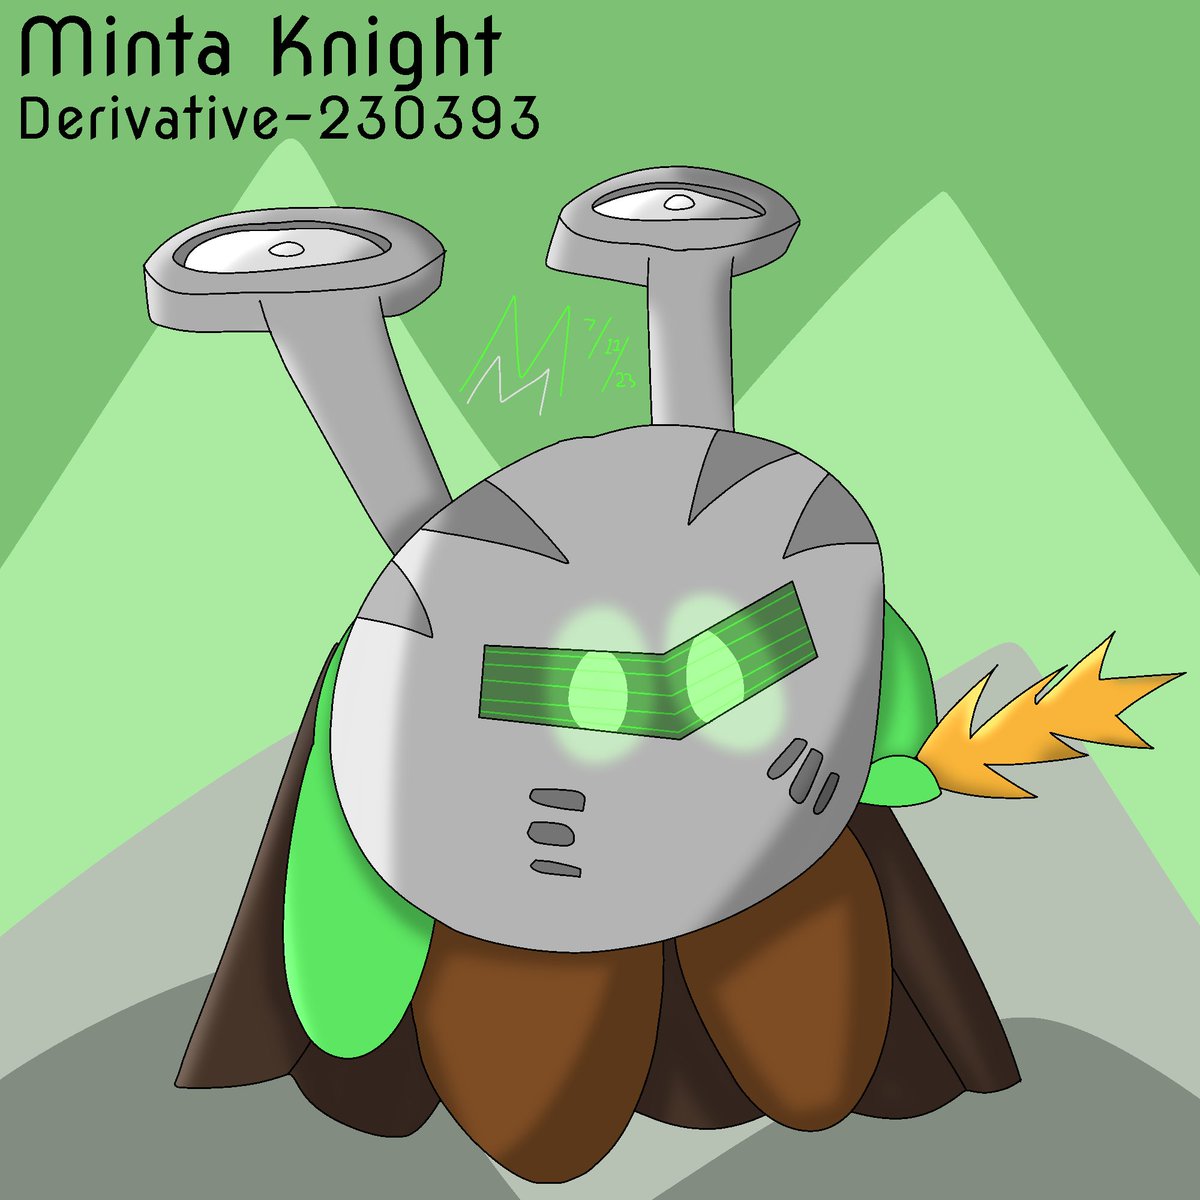 Mint's a robot who classifies himself and his drones as 'weapons' in their own right.
Demint Cores are explosive kamikaze drones.
Minkatons utilize their hammer for attack.
Minta Knights fight according to combat data garnered from 'the strongest warrior in the galaxy.'